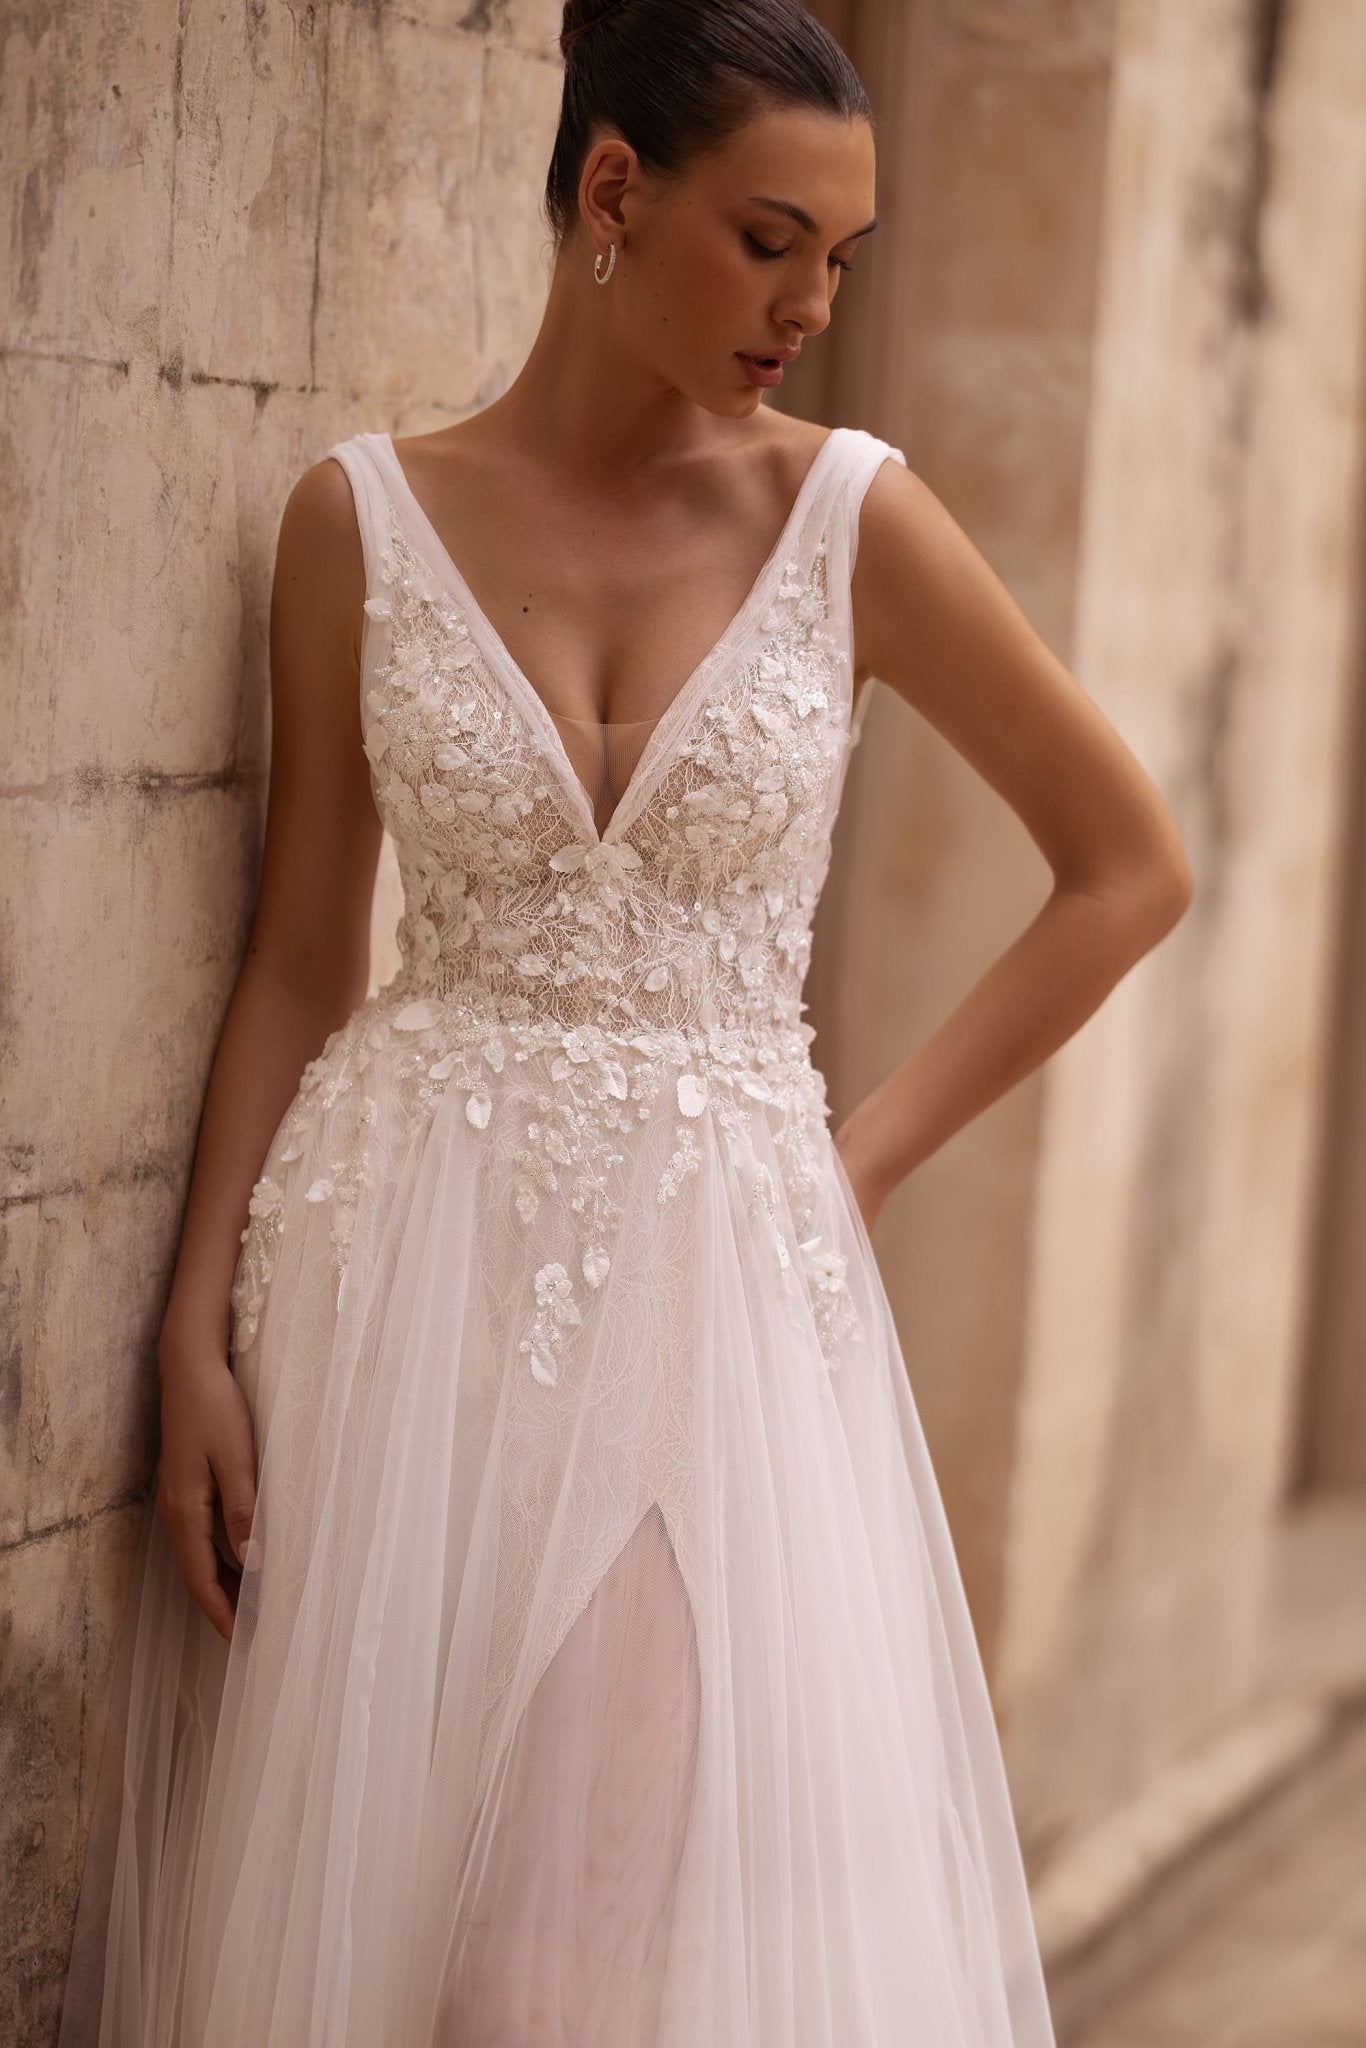 Romantic A-Line Wedding Dress with Beaded Floral Appliqués and Illusory Cutouts, Plus Size Available - WonderlandByLilian